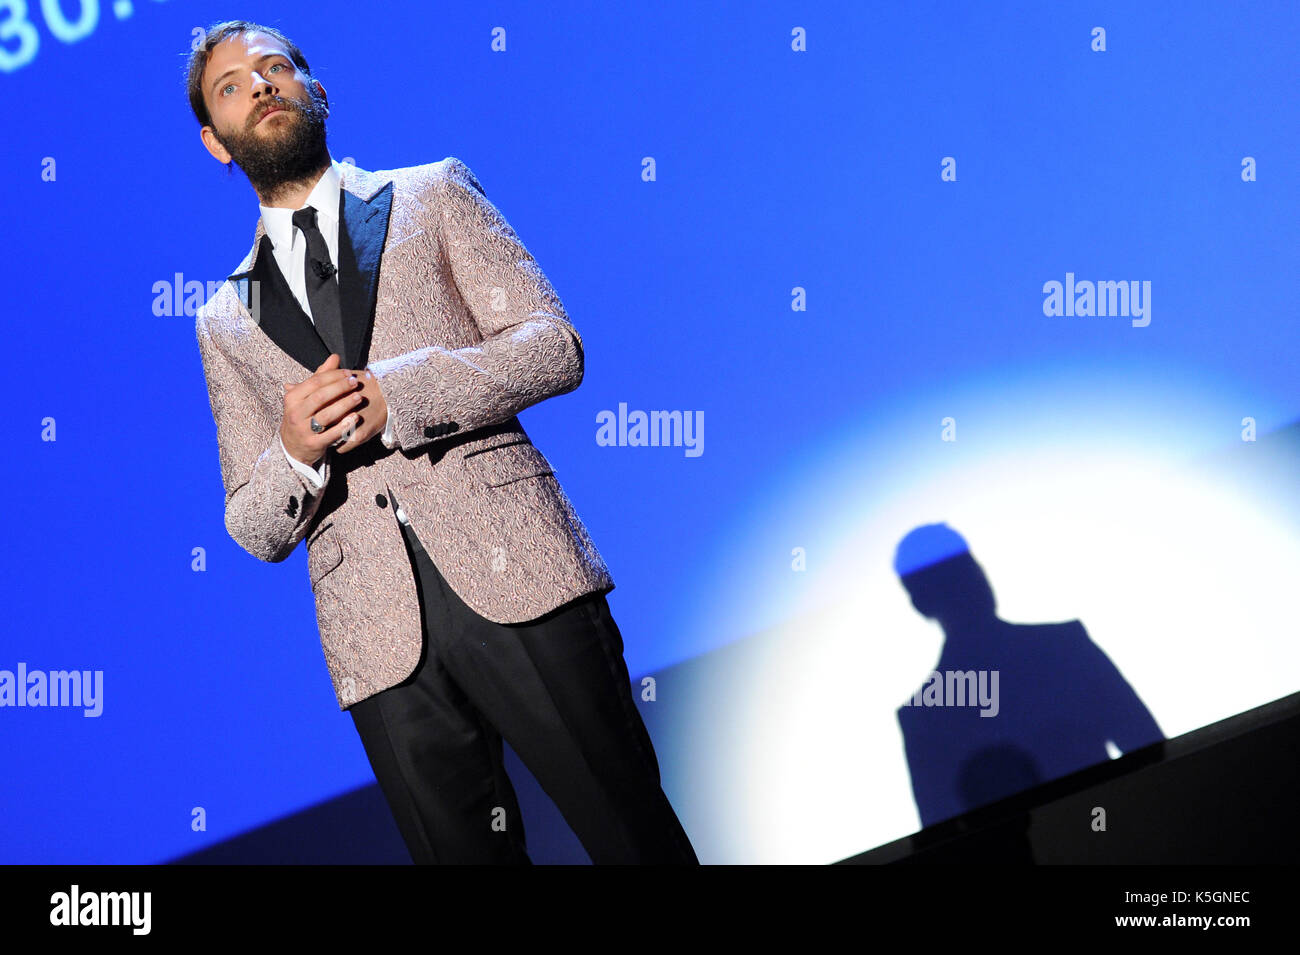 Venice, Italy. 9th September, 2017. 74th Venice Film Festival, 'Venezia 74' Golden Lions Awards Ceremony Pictured: Alessandro Borghi Credit: Independent Photo Agency Srl/Alamy Live News Stock Photo